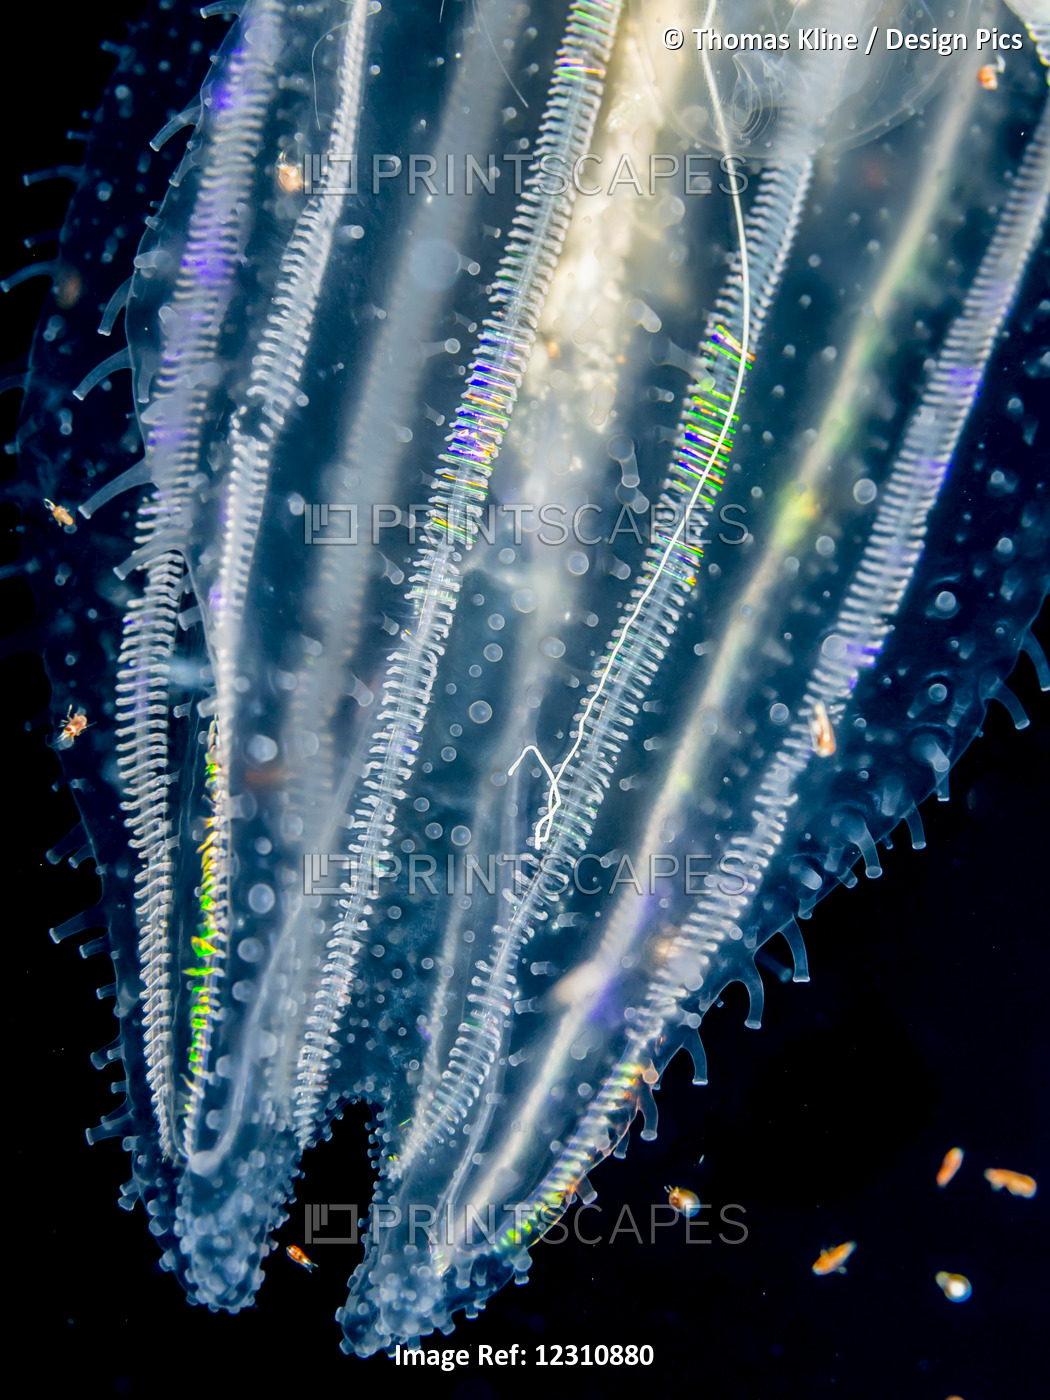 Lobate Ctenophore Or Comb Jelly (Leucothea Multicornis) That Was Photographed ...